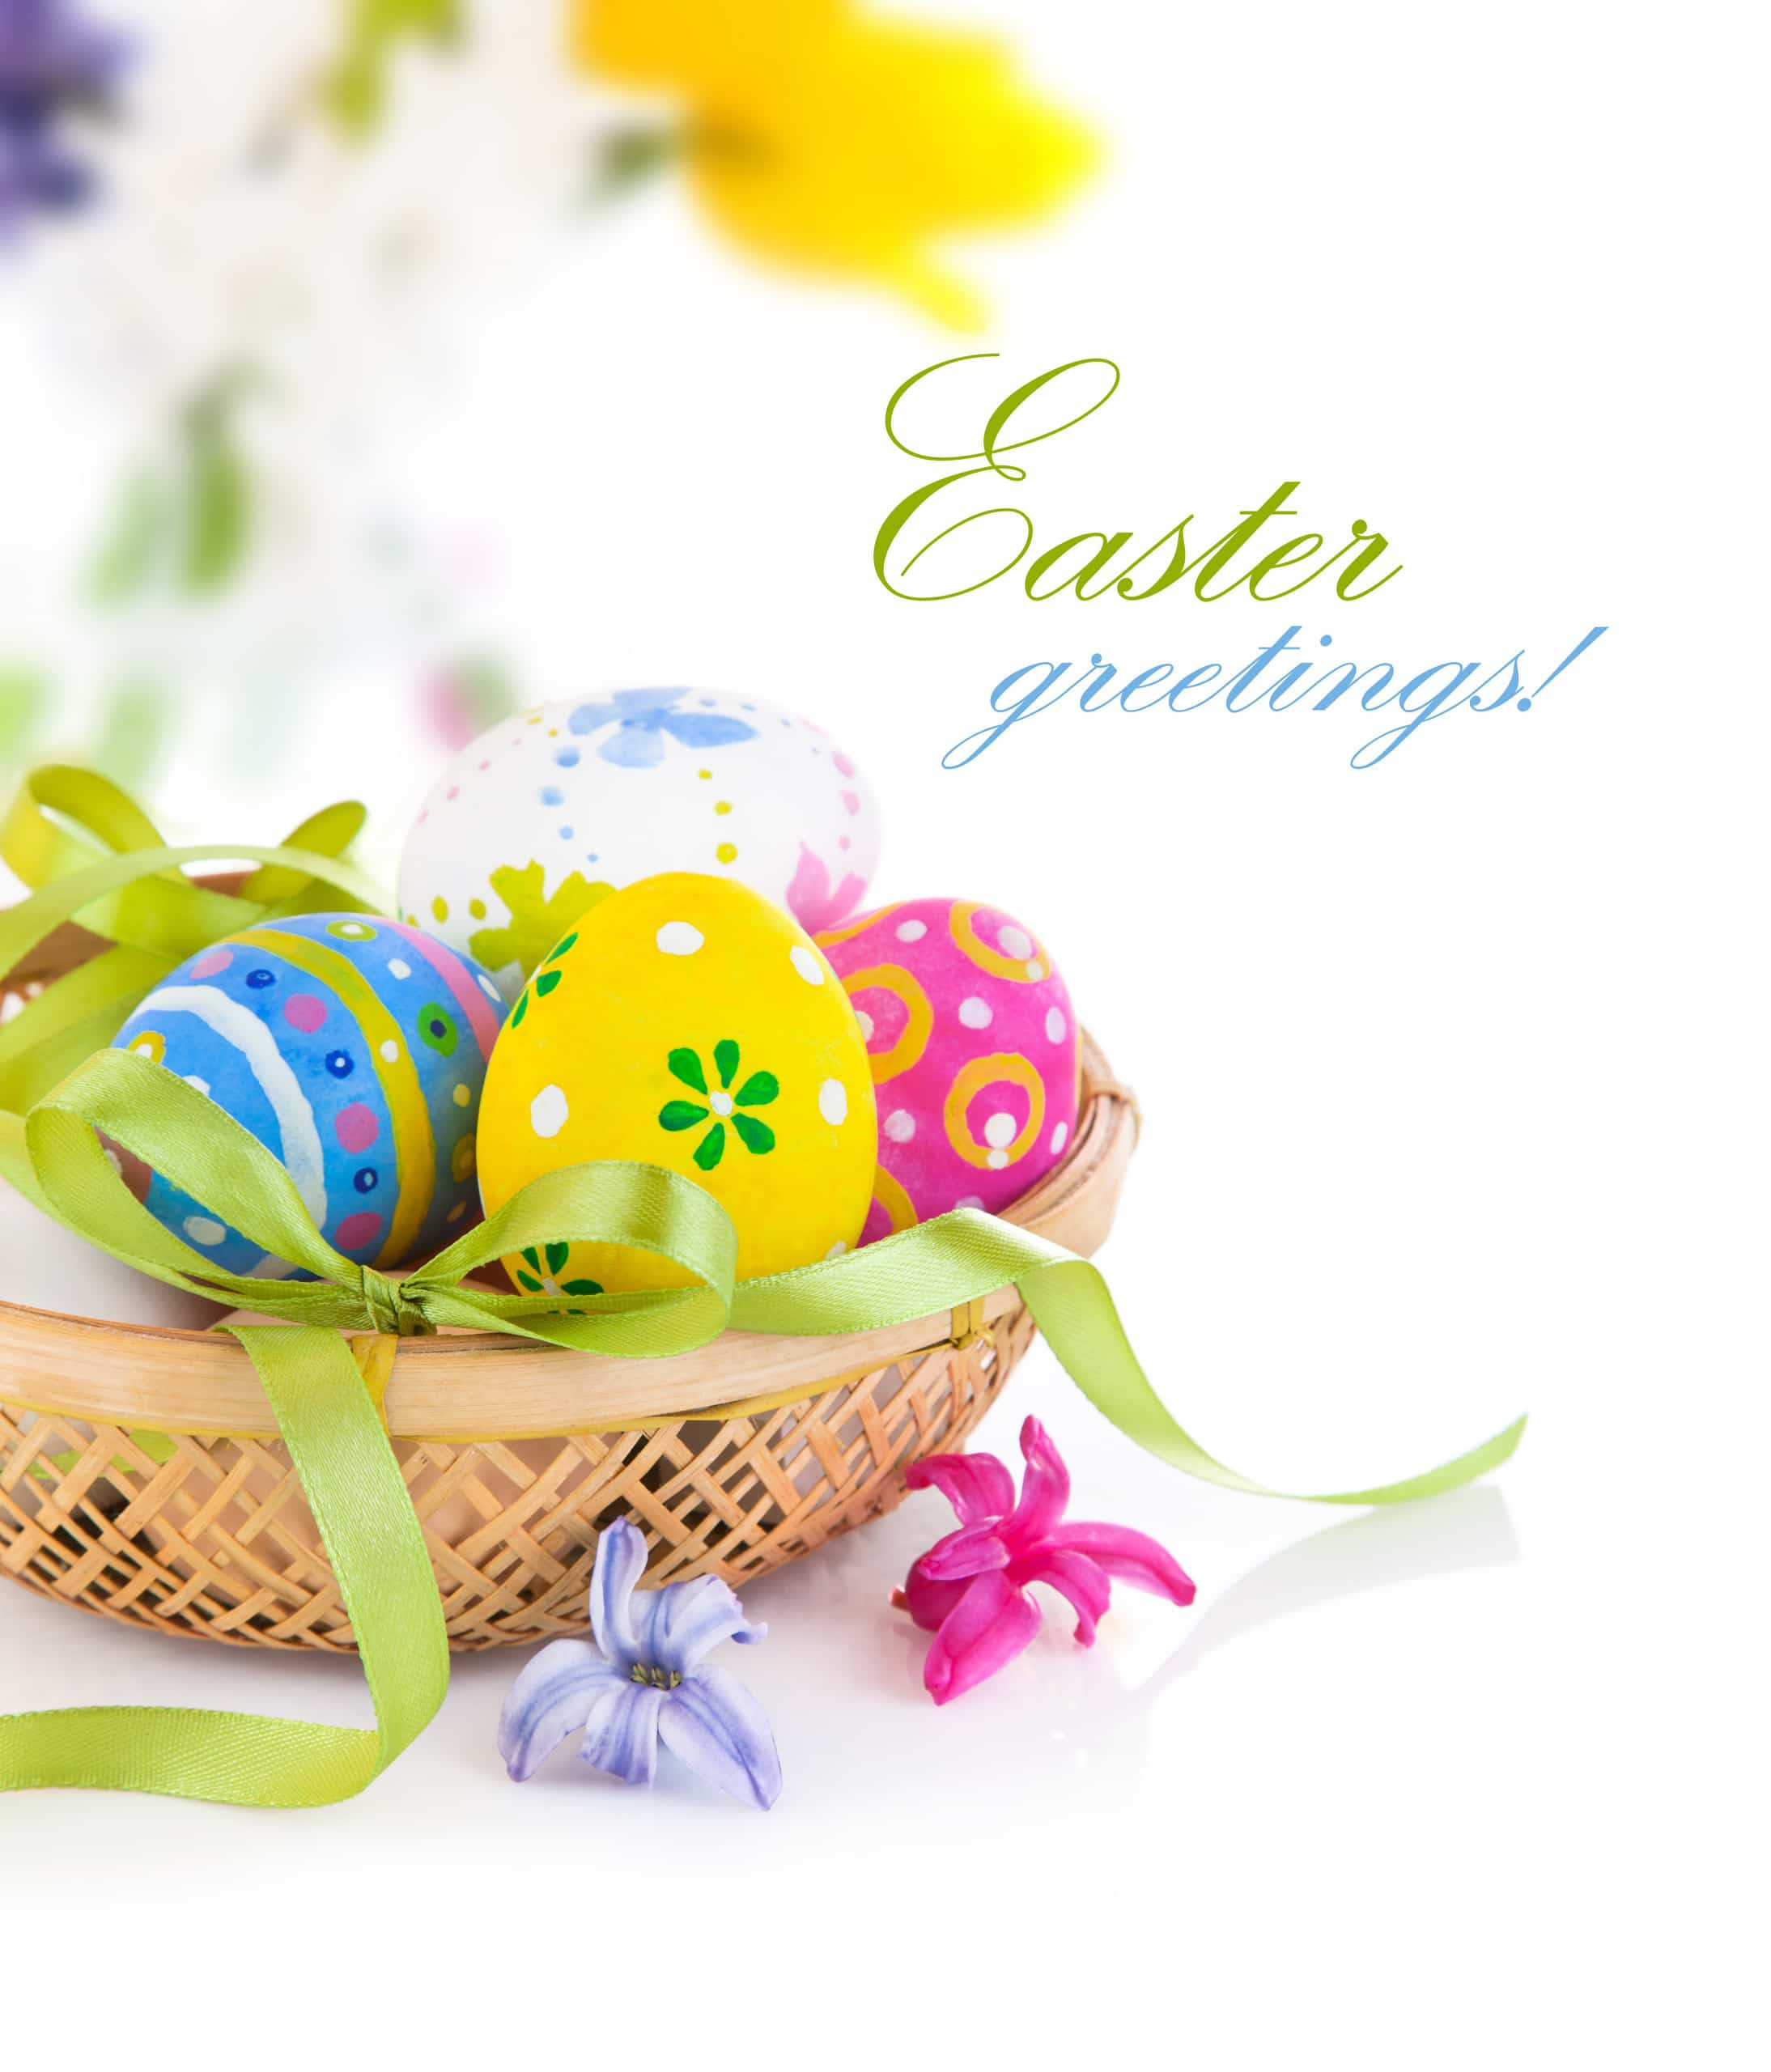 Happy Easter Quotes And Images
 Happy Easter Greetings Messages Sayings 2019 For